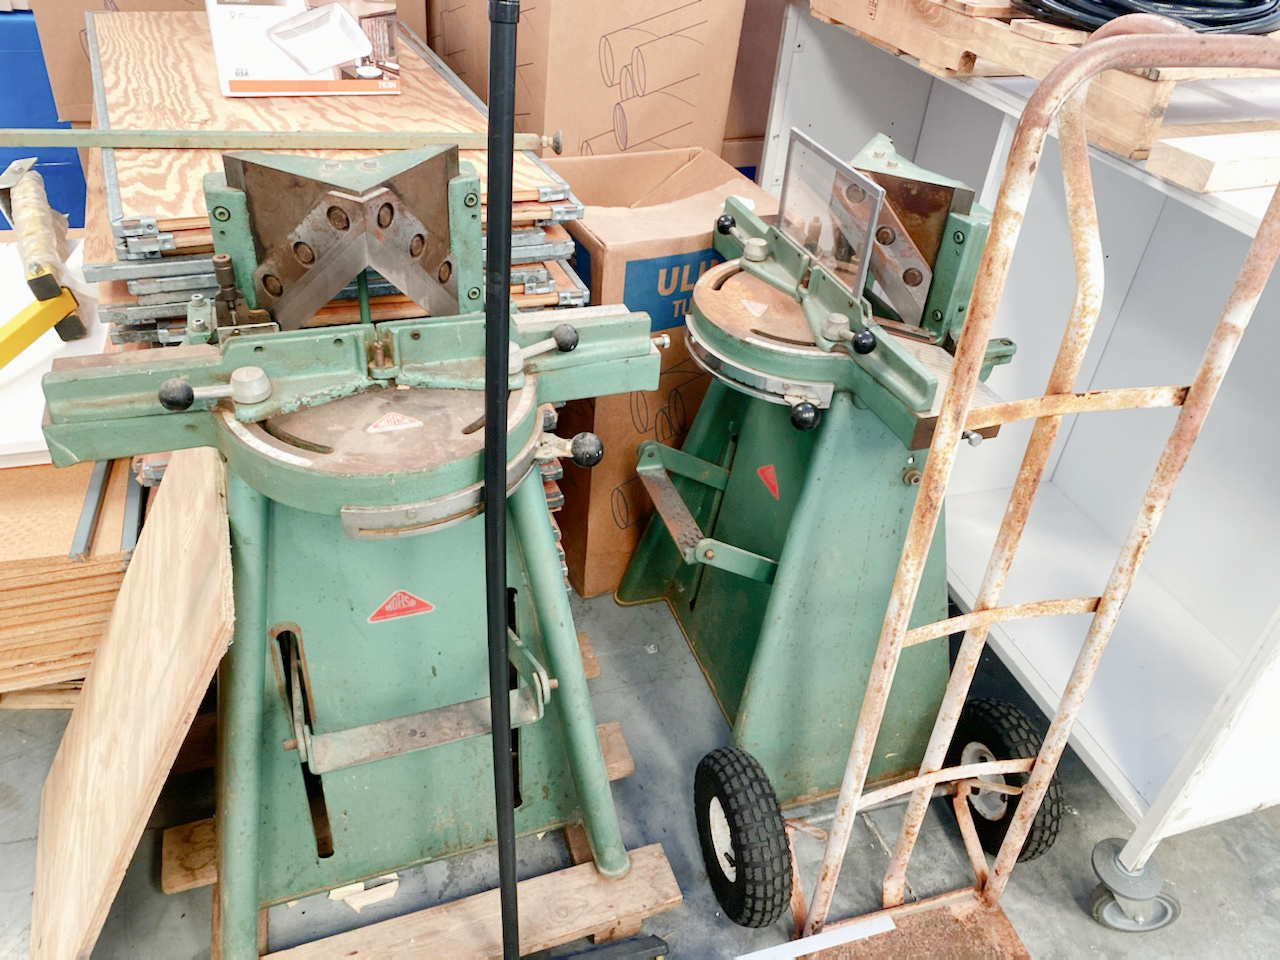 Picture Framing Equipment Lot: Morso Chopper / Choppers (Used) Item # UE-070921A (Florida)